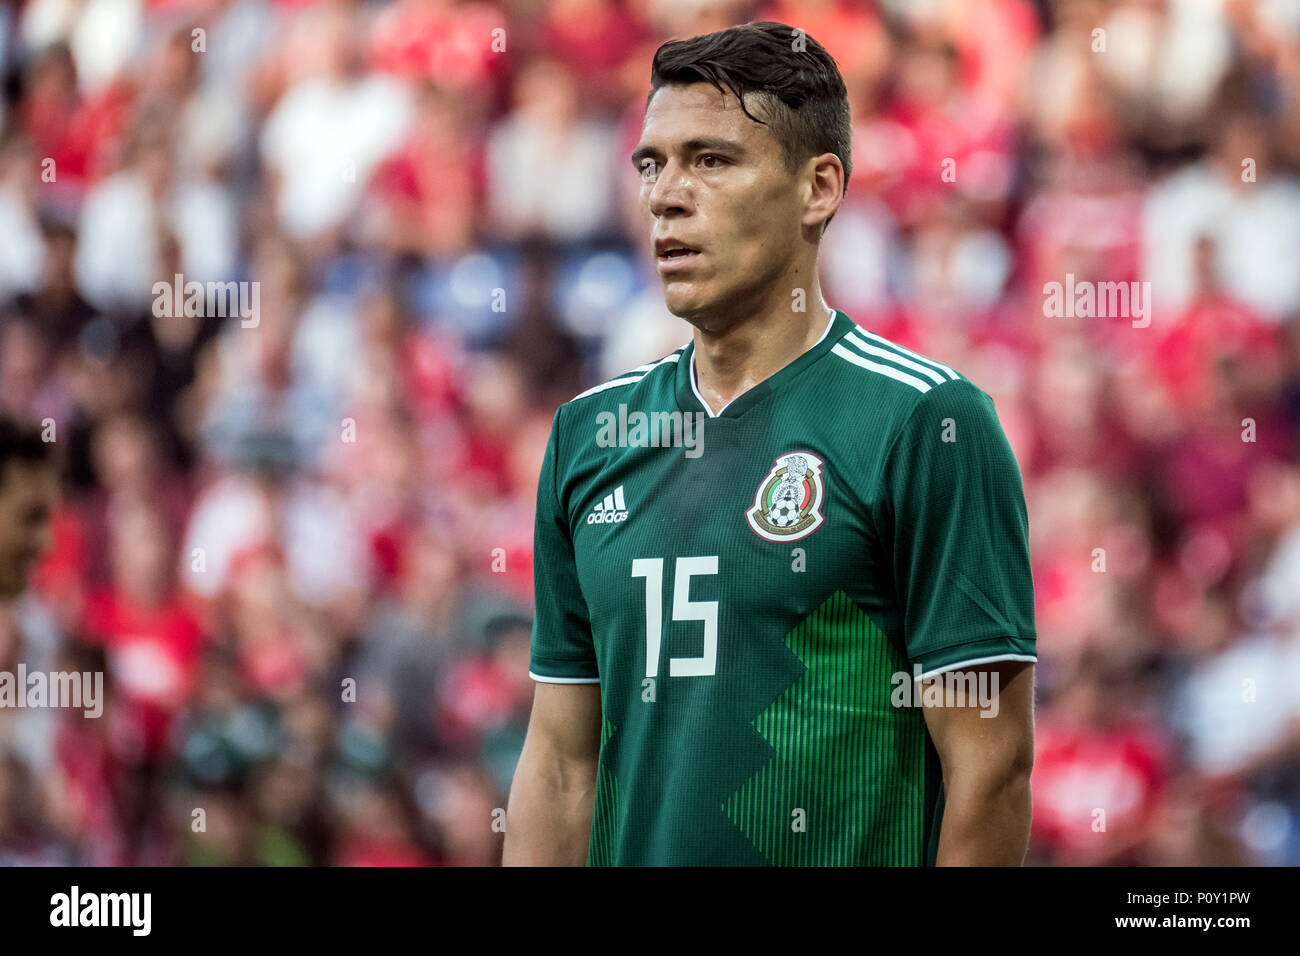 Denmark, Brøndby - June 09, 2018. Hector Moreno (15) of Mexico seen during the football friendly between Denmark and Mexico at Brøndby Stadion. (Photo credit: Gonzales Photo - Kim M. Leland). Credit: Gonzales Photo/Alamy Live News Stock Photo